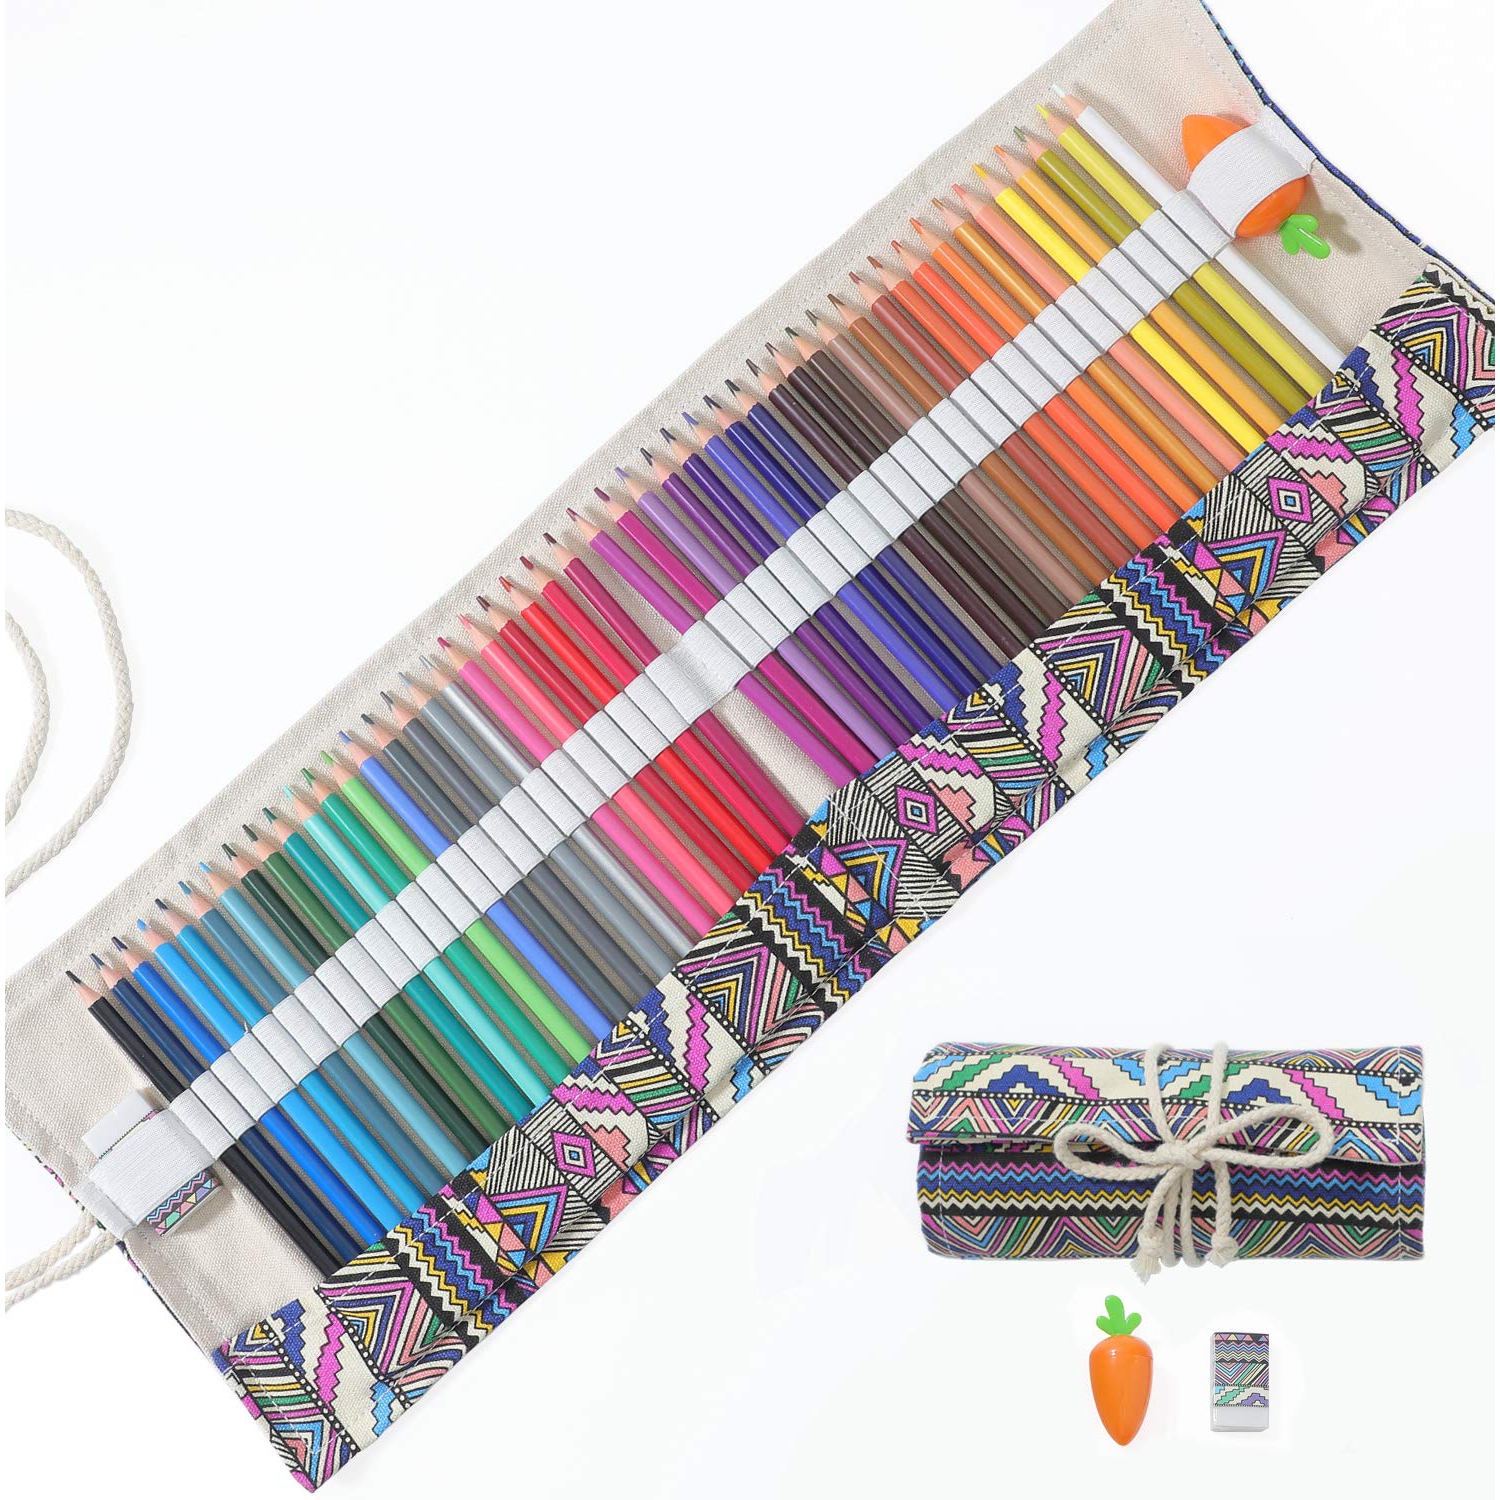 Vibrant Artistry: Premium Colored Pencils Set for All Ages - Sketch, Draw, and Create with Confidence - Includes Eraser, Sharpener, and Canvas Carry Pouch - 48 Colors